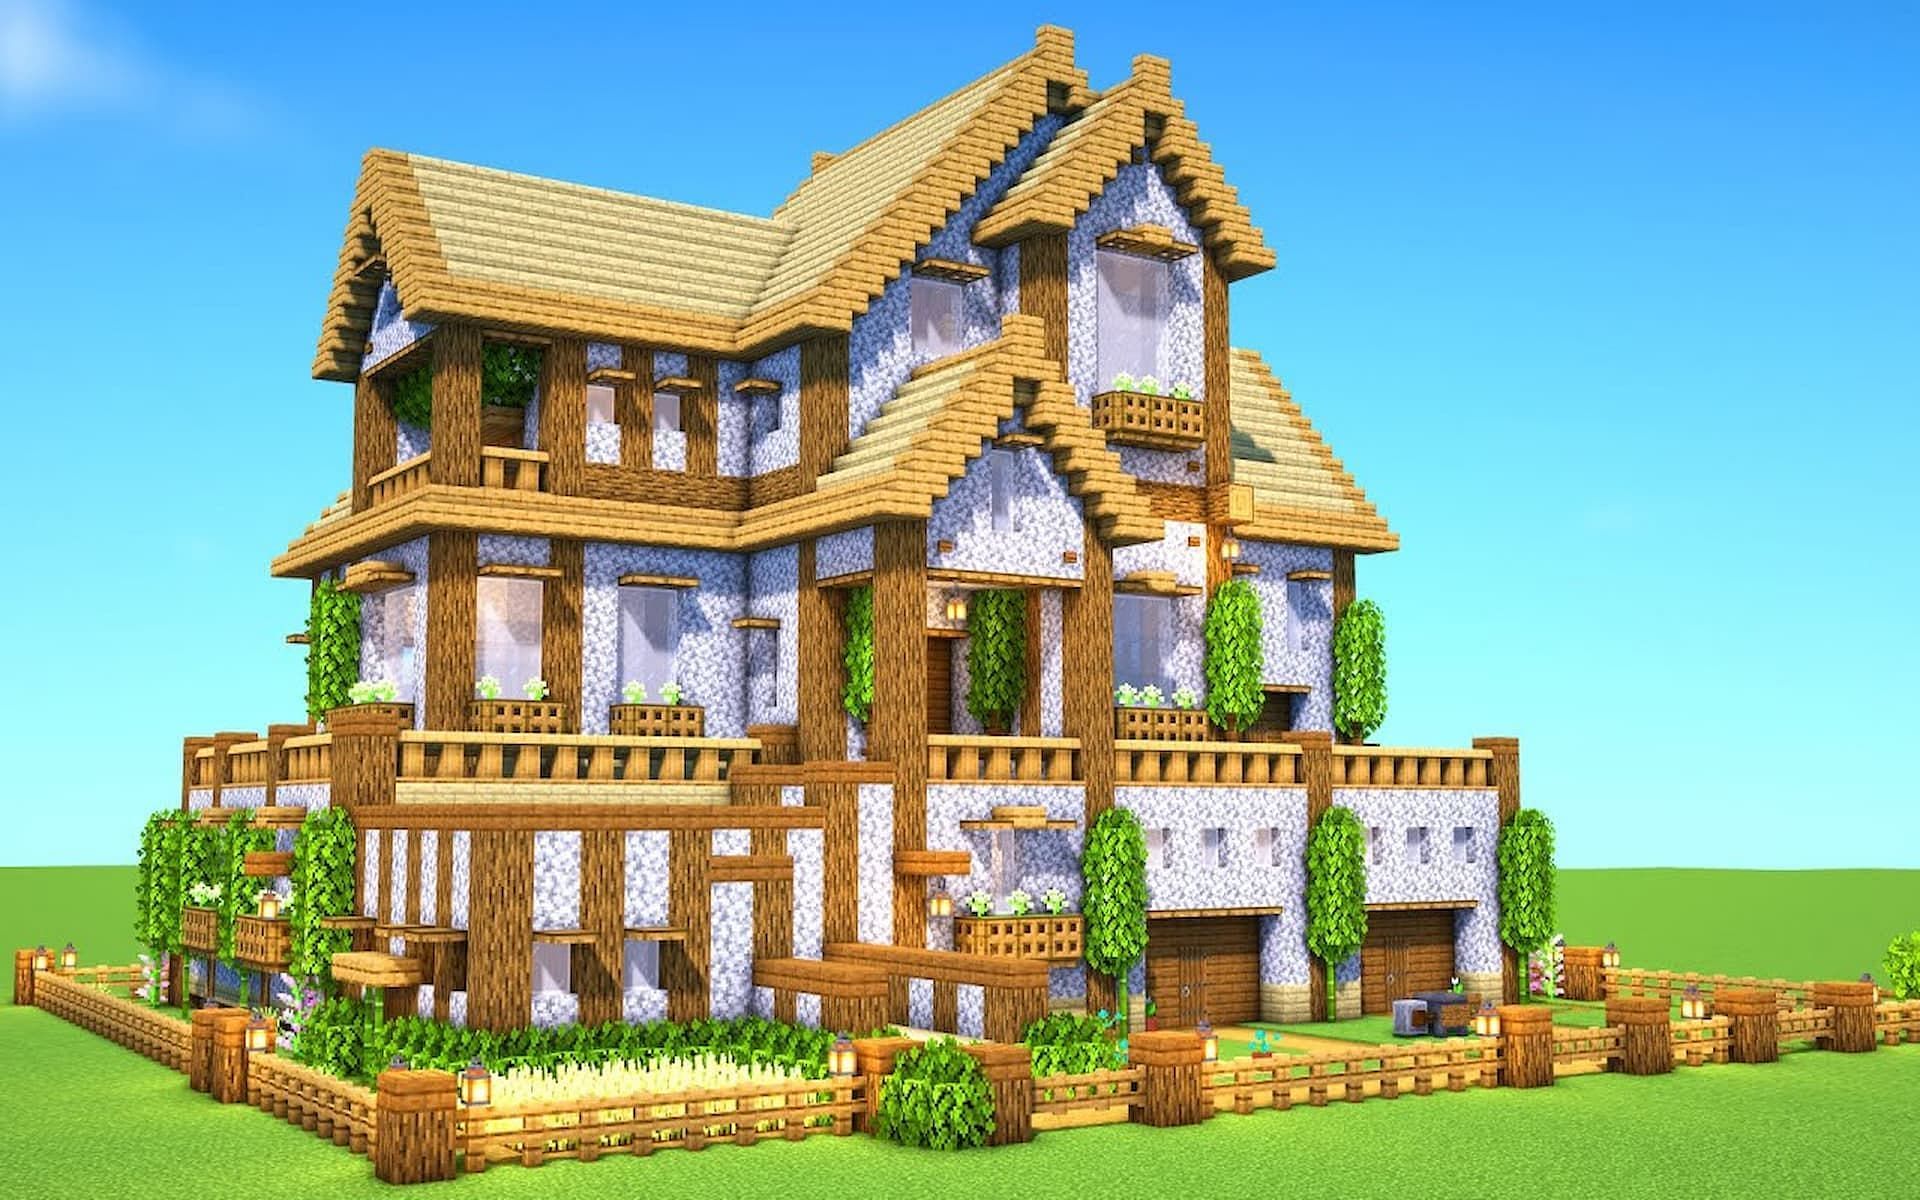 A large mixed stone and brick house with wooden roof built in Minecraft